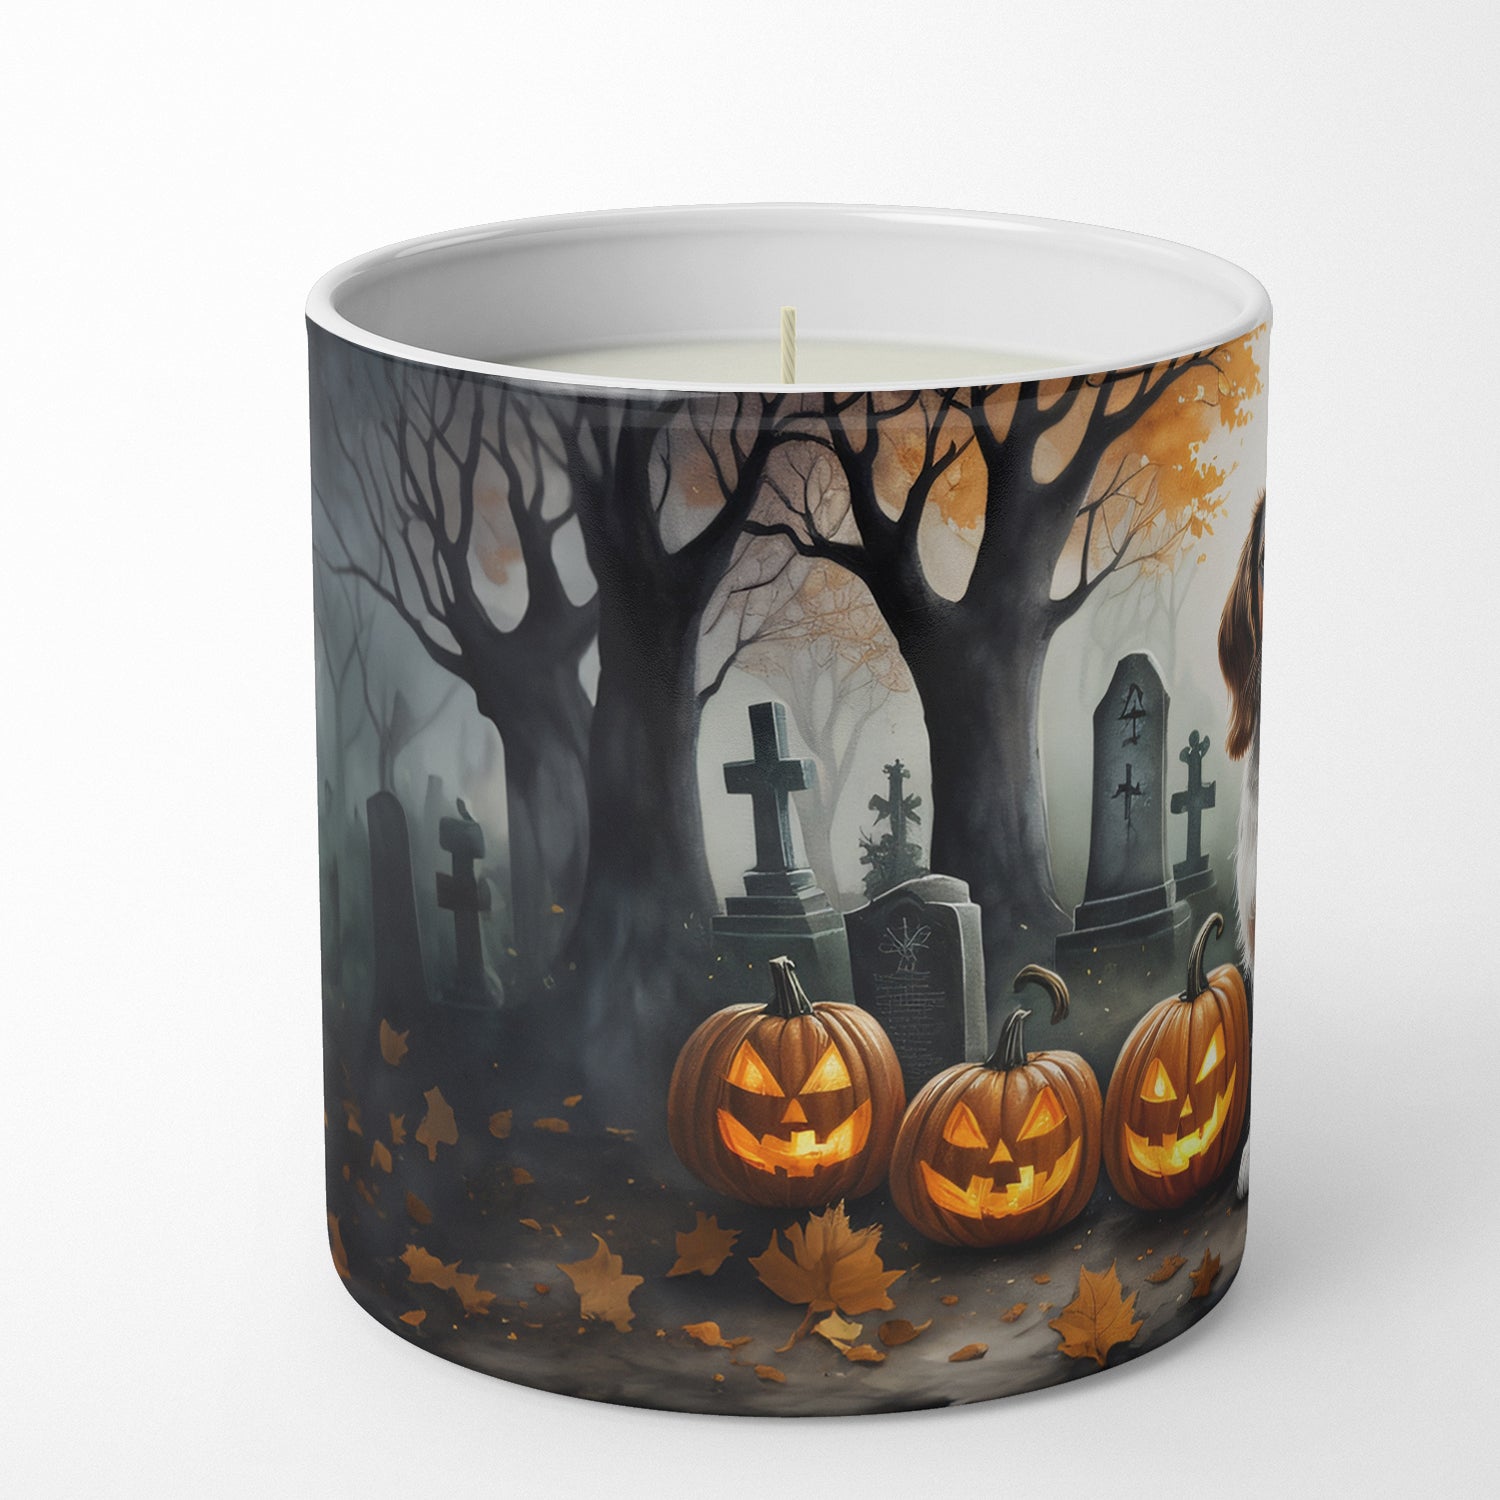 Welsh Springer Spaniel Spooky Halloween Decorative Soy Candle